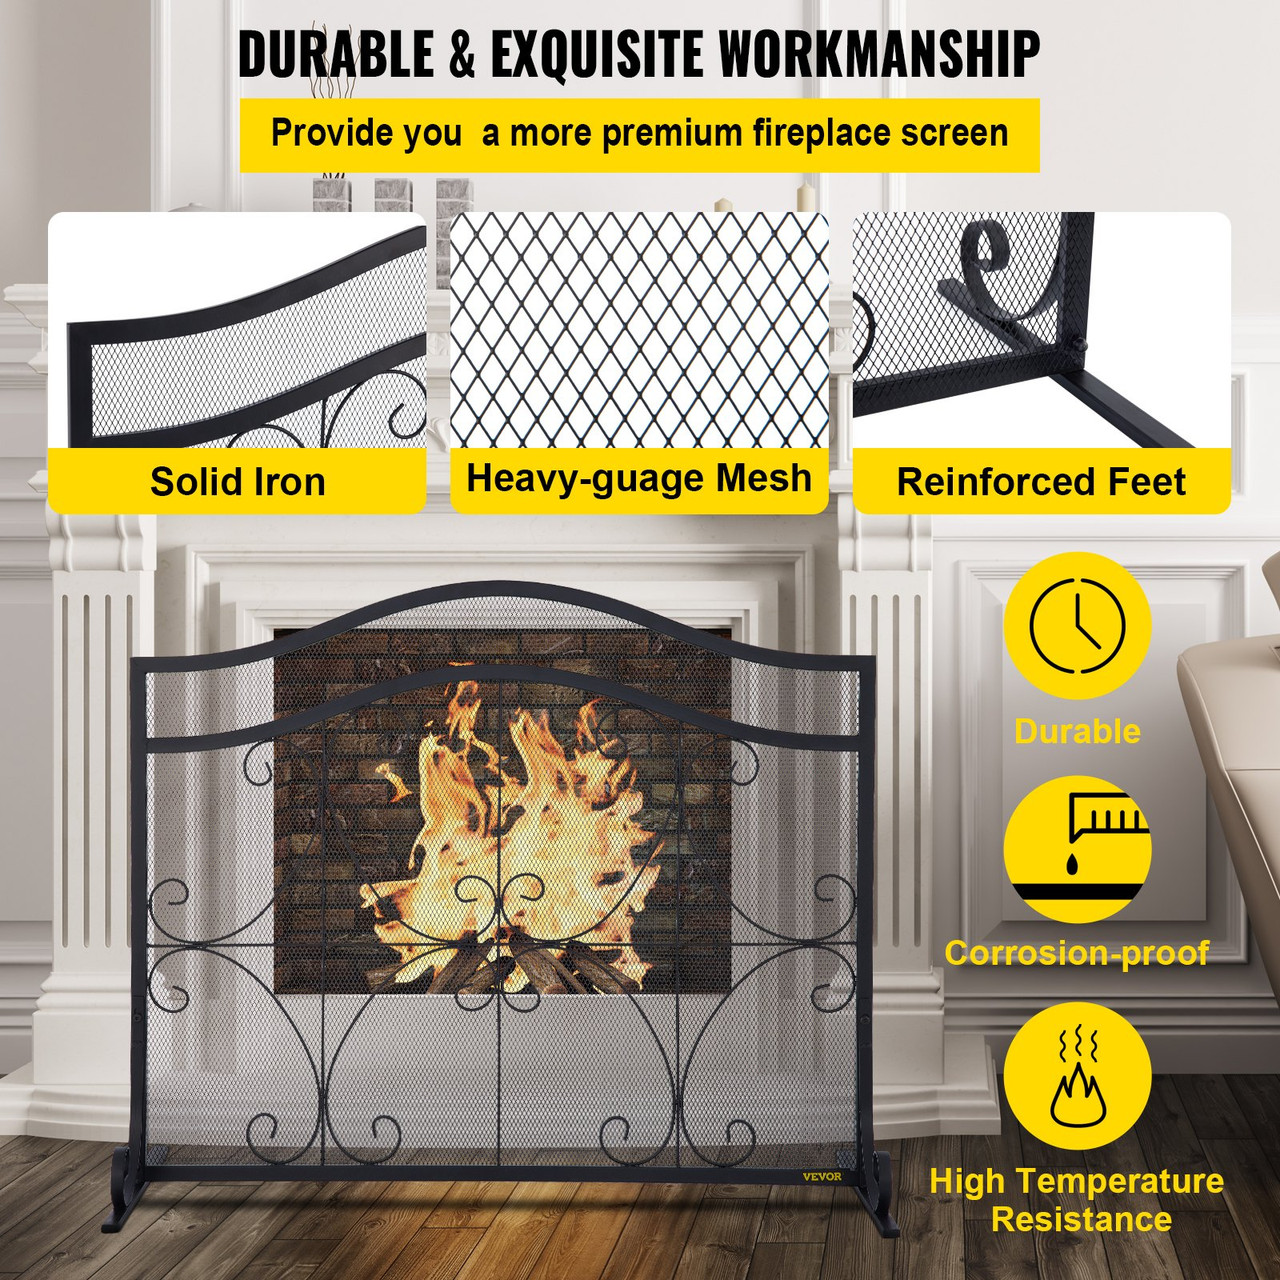 Fireplace Screen, 38 x 26.5 Inch,Heavy Duty Iron Freestanding Spark Guard with Support, Metal Mesh Craft, Broom Tong Shovel Poker Included for Fireplace Decoration & Protection, Black